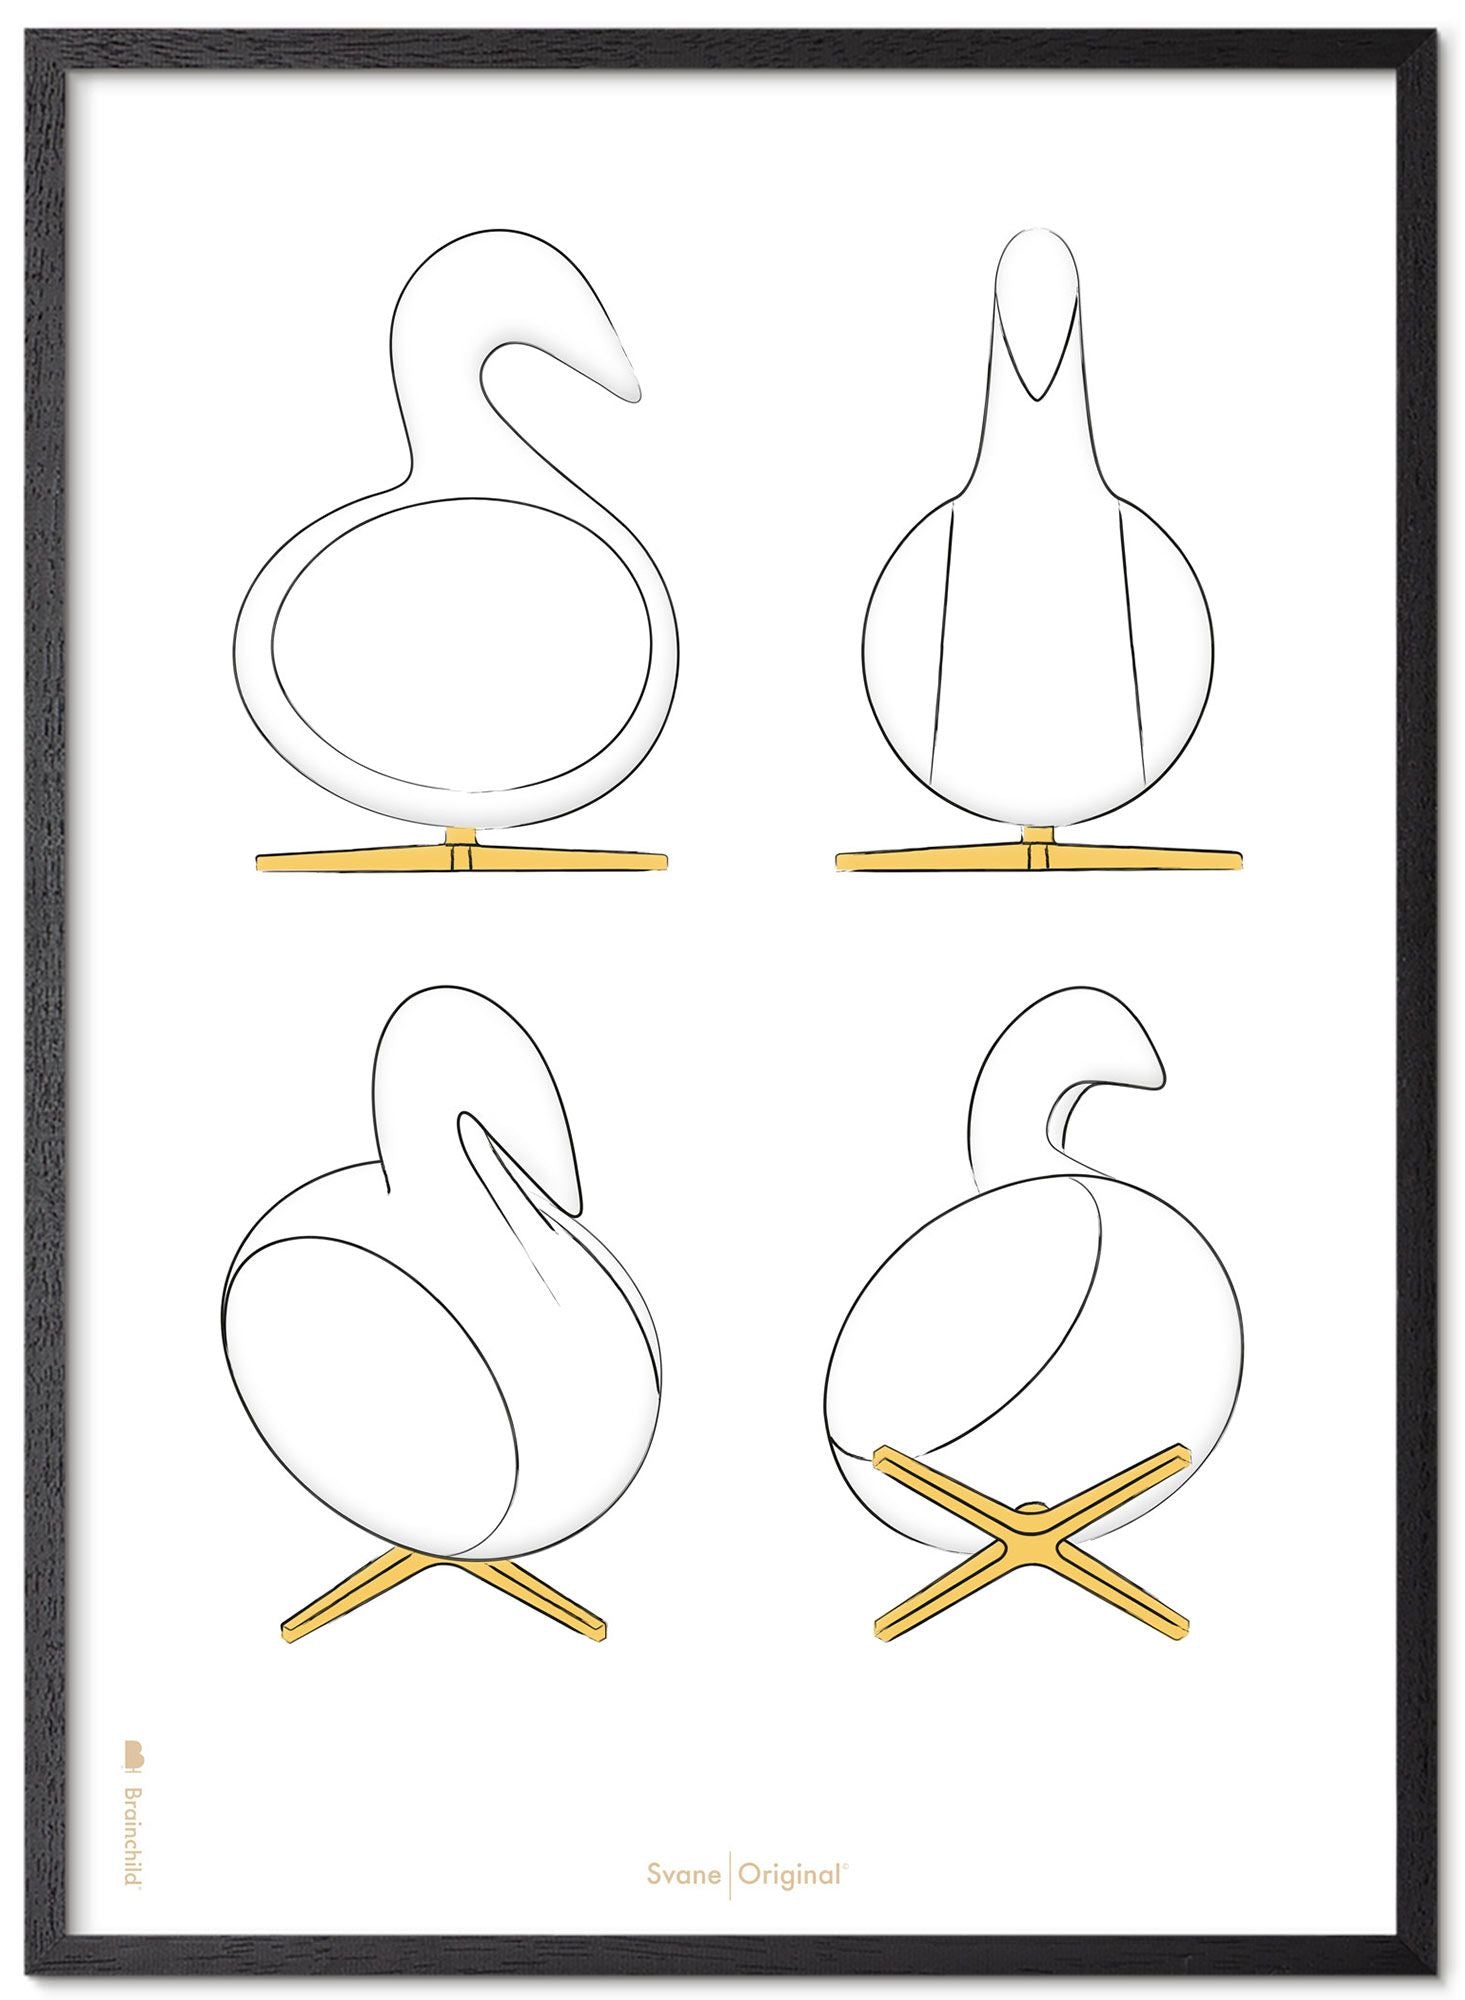 Brainchild Swan Design Sketches Poster Frame Made Of Black Lacquered Wood A5, White Background